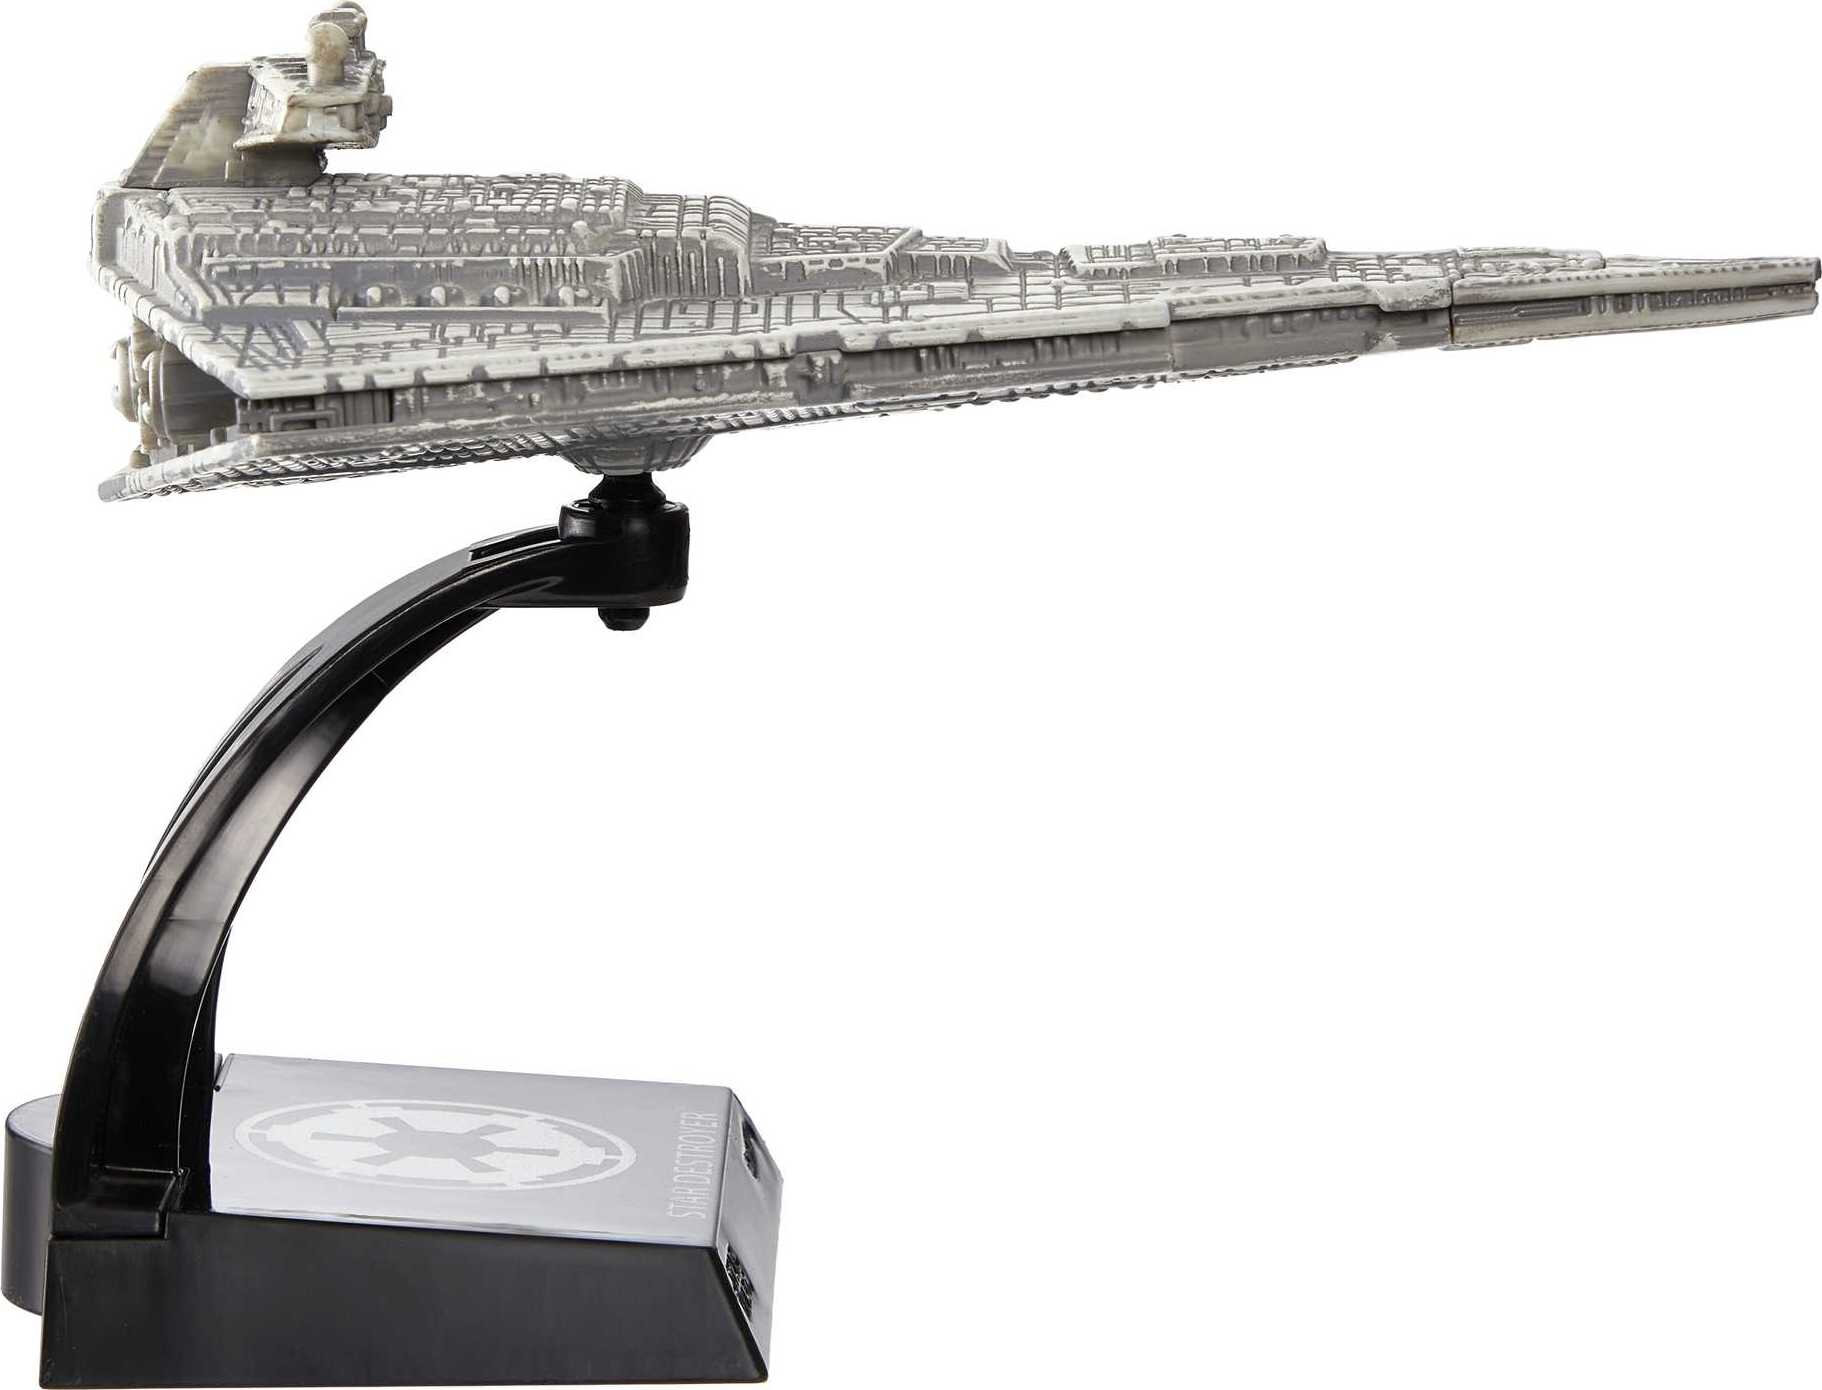 Hot Wheels Star Wars Starships Select, Premium Replica, Gift For Adults Collectors - image 3 of 5